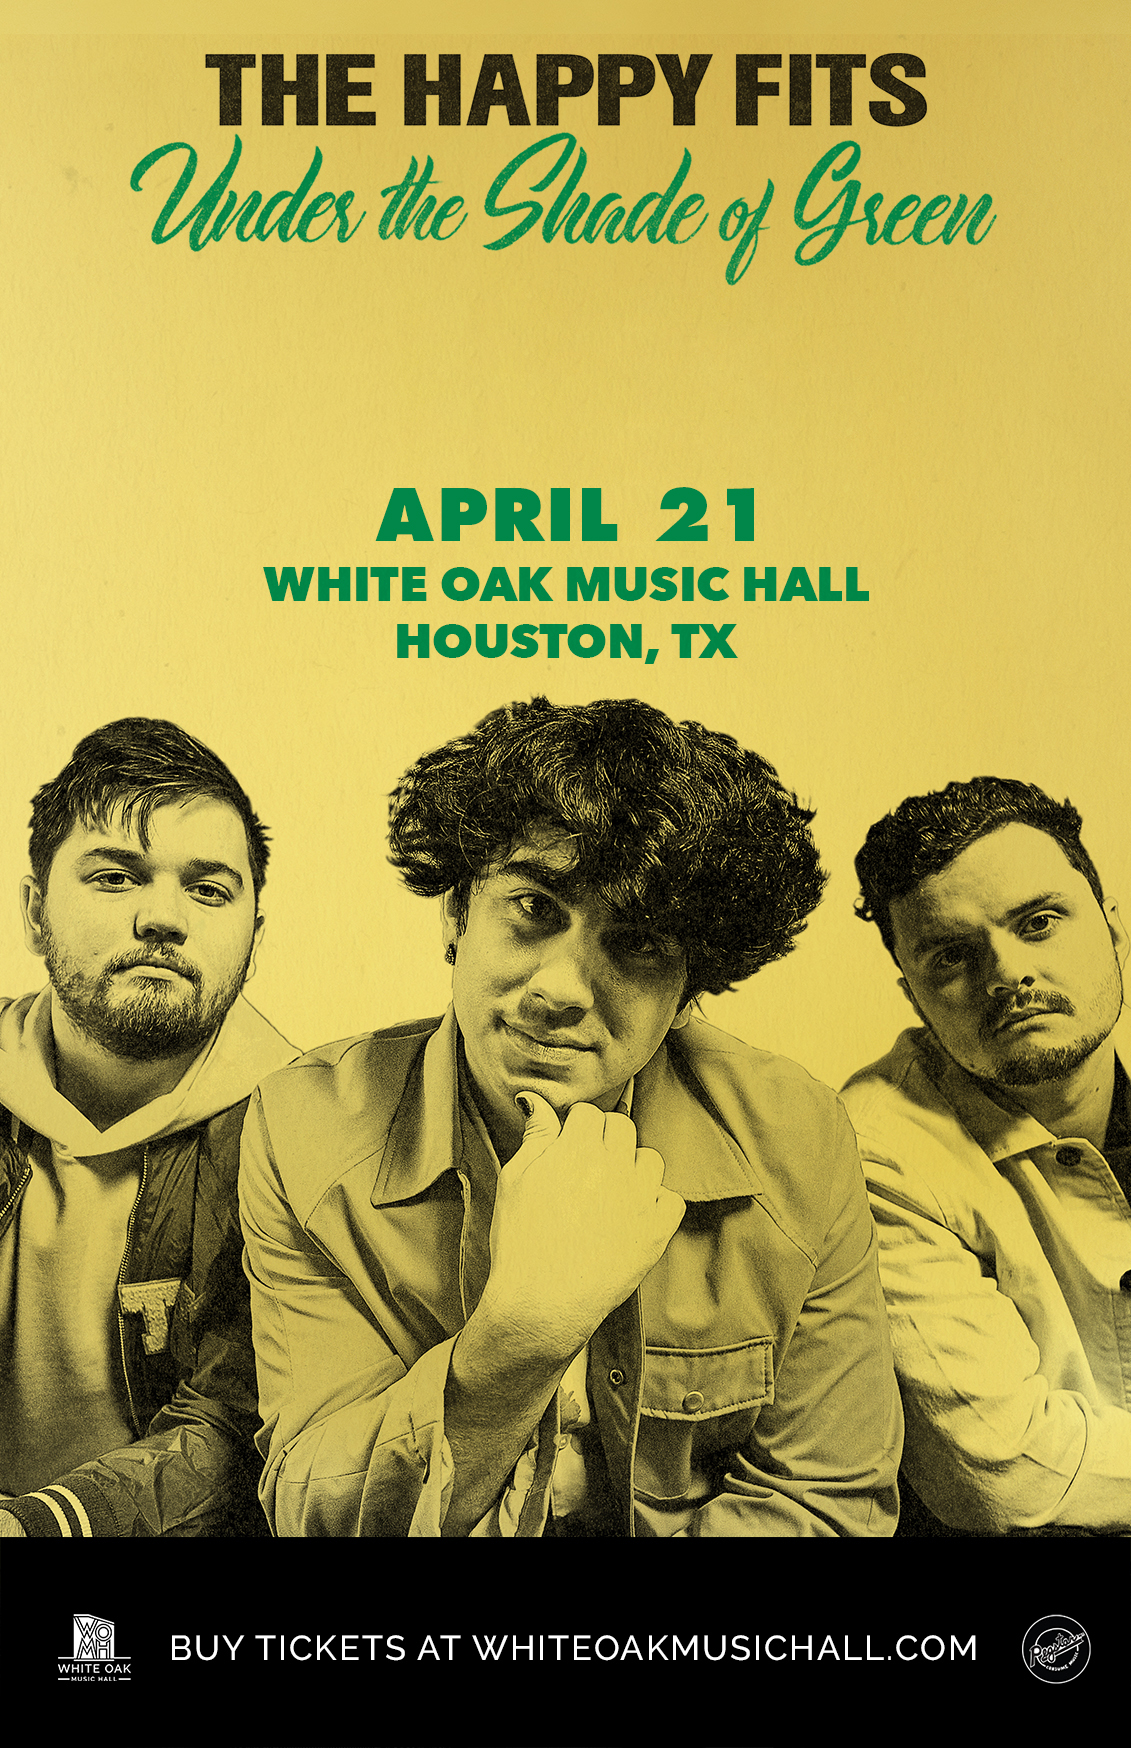 Buy Tickets to The Happy Fits Under The Shade of Green Tour in Houston